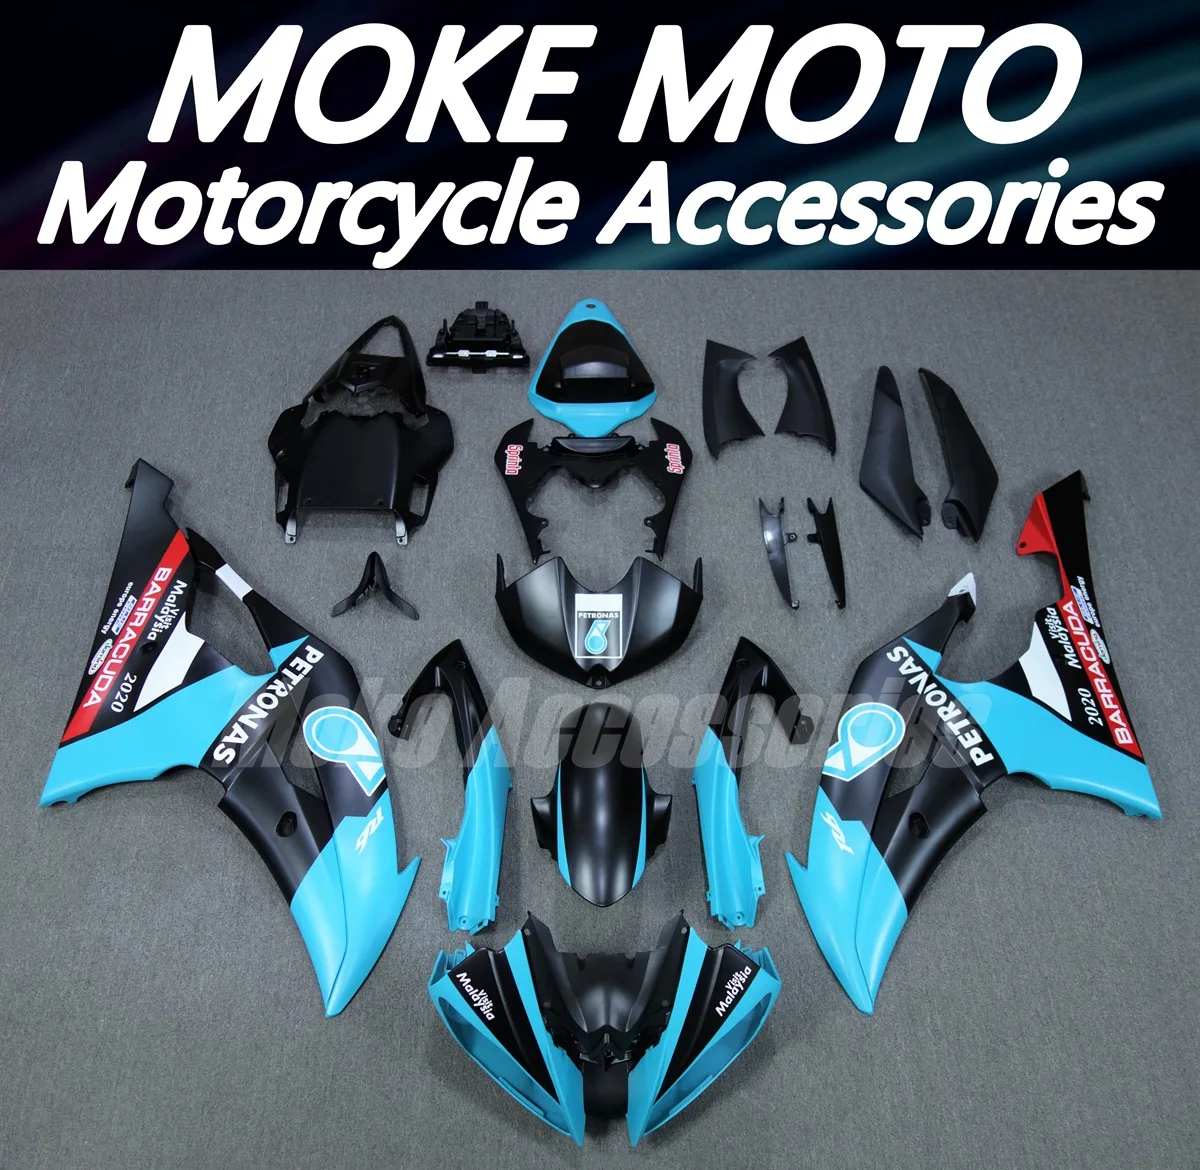 

Motorcycle Fairings Kit Fit For Yzf R6 2008 2009 2010 2011 2012 2013 2014 2015 2016 Bodywork Set Abs Injection Black Blue White